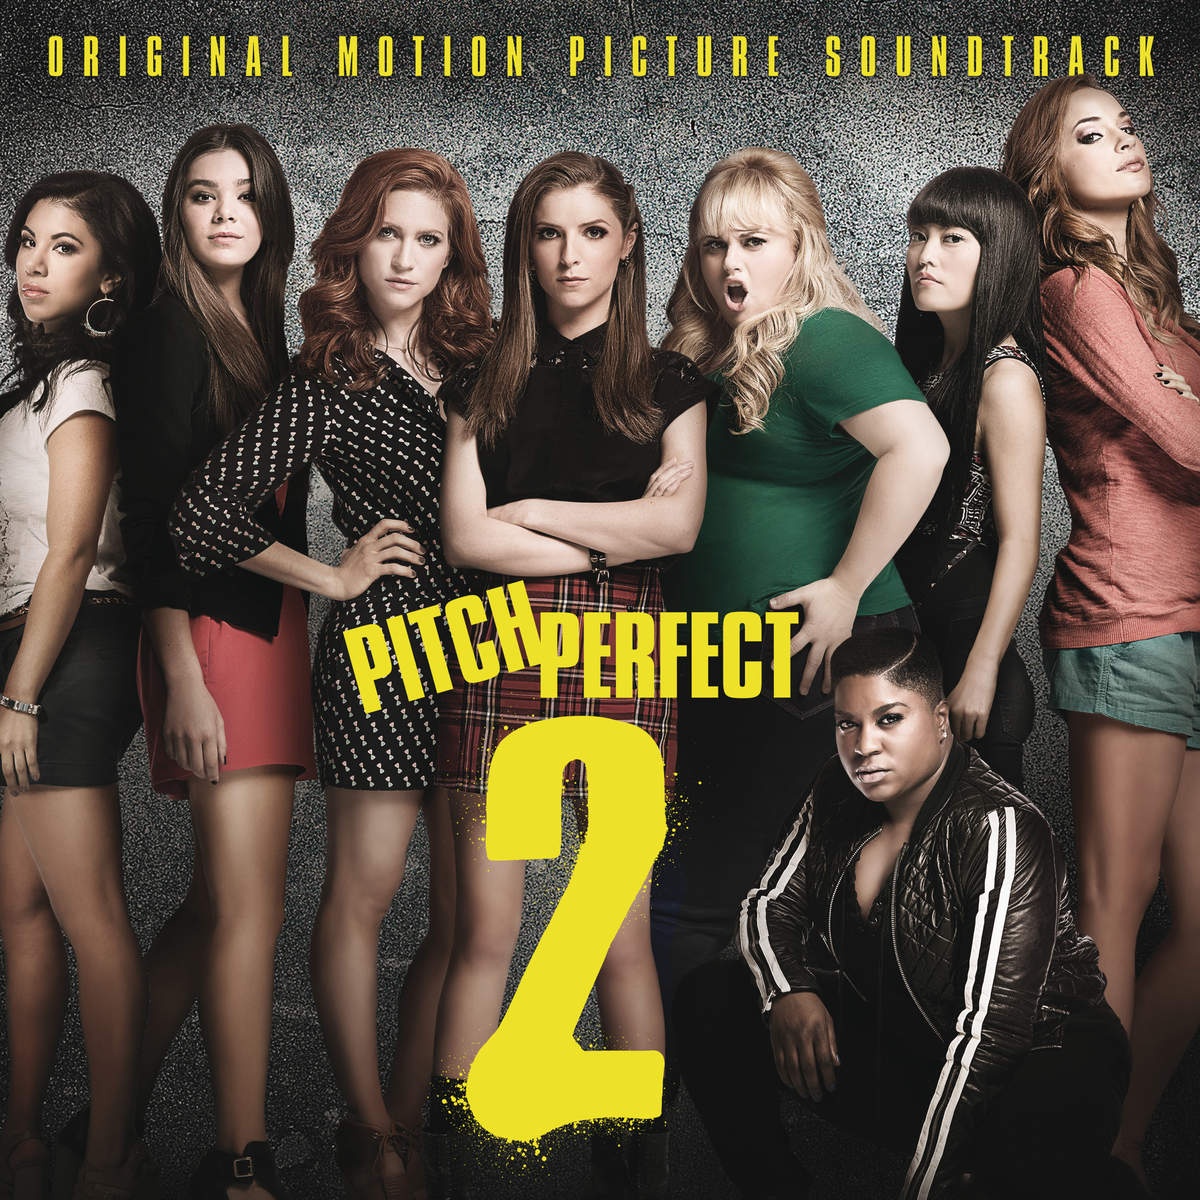 Car Show - From "Pitch Perfect 2" Soundtrack